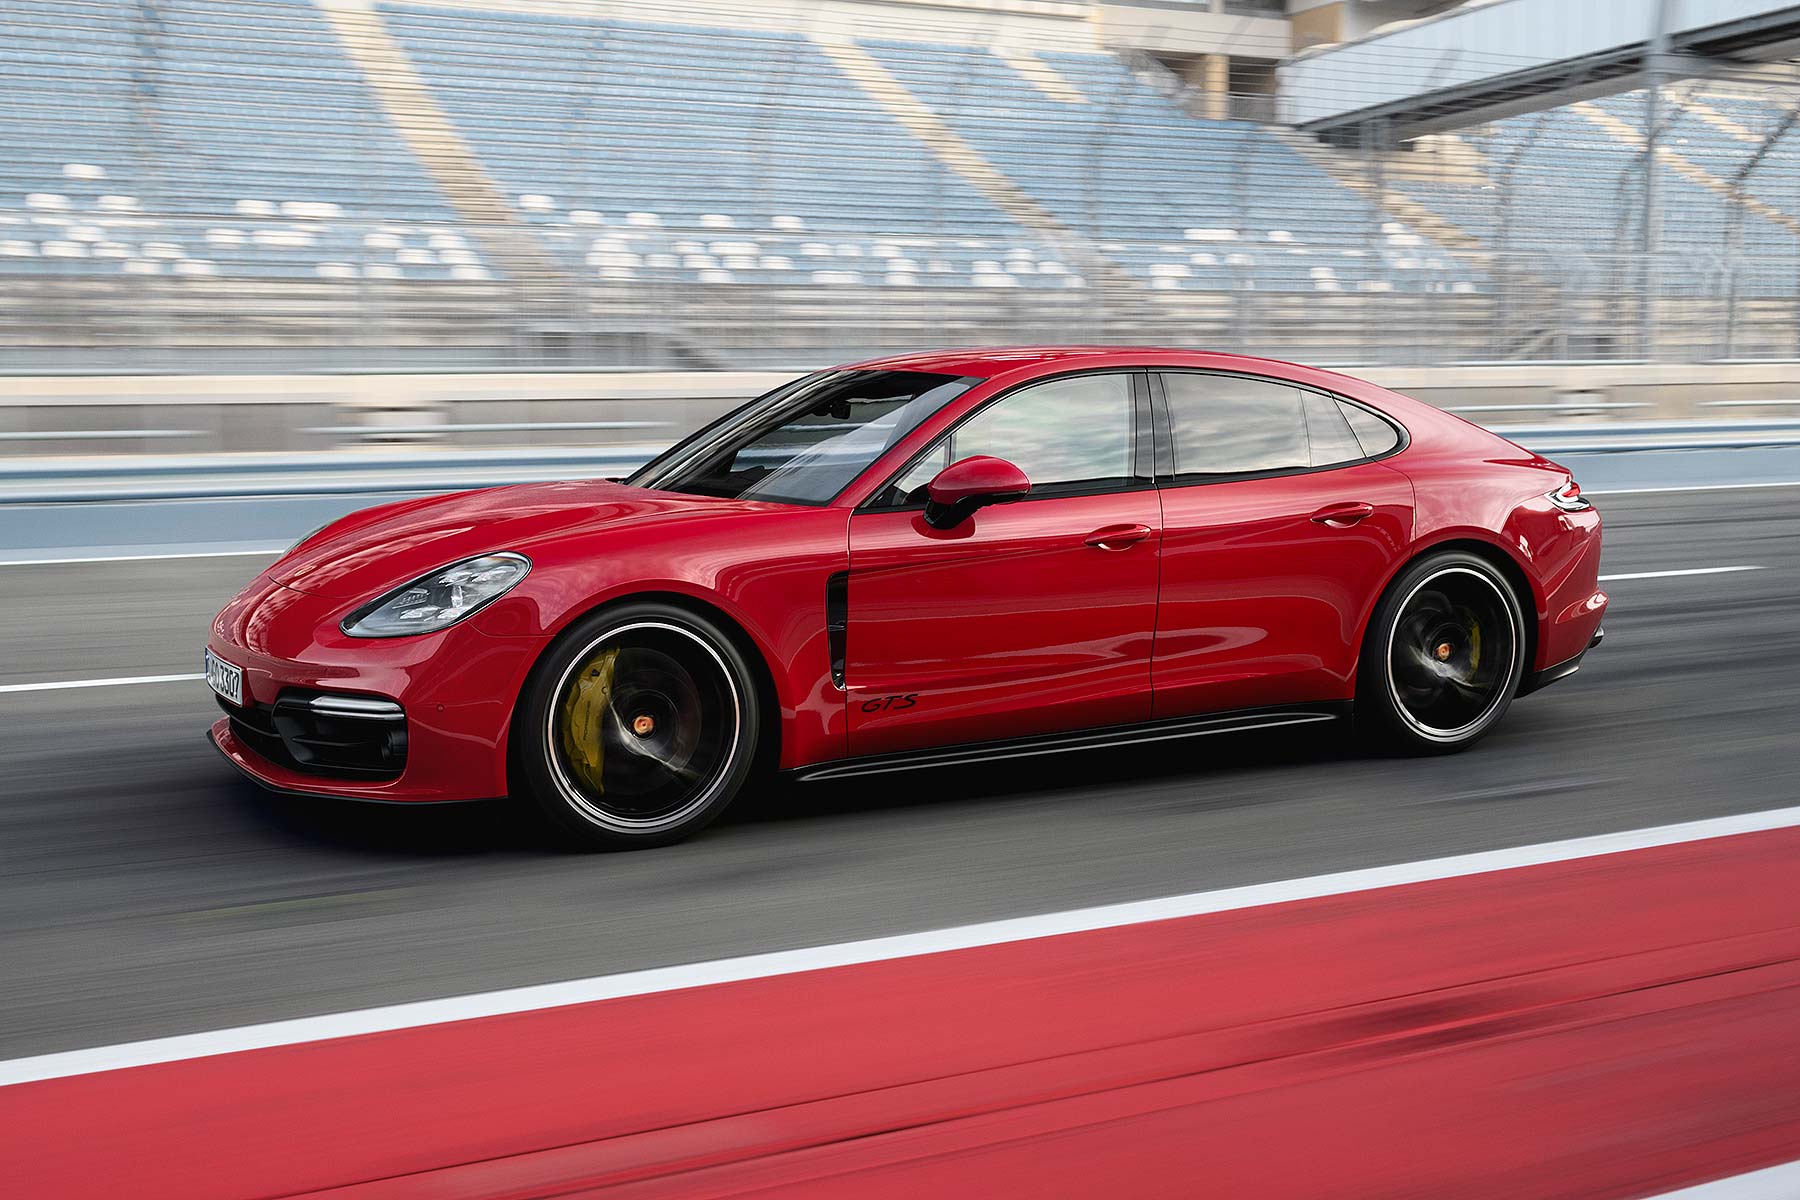 2019 Porsche Panamera Gts The 460hp V8 Express With A Particulate Filter